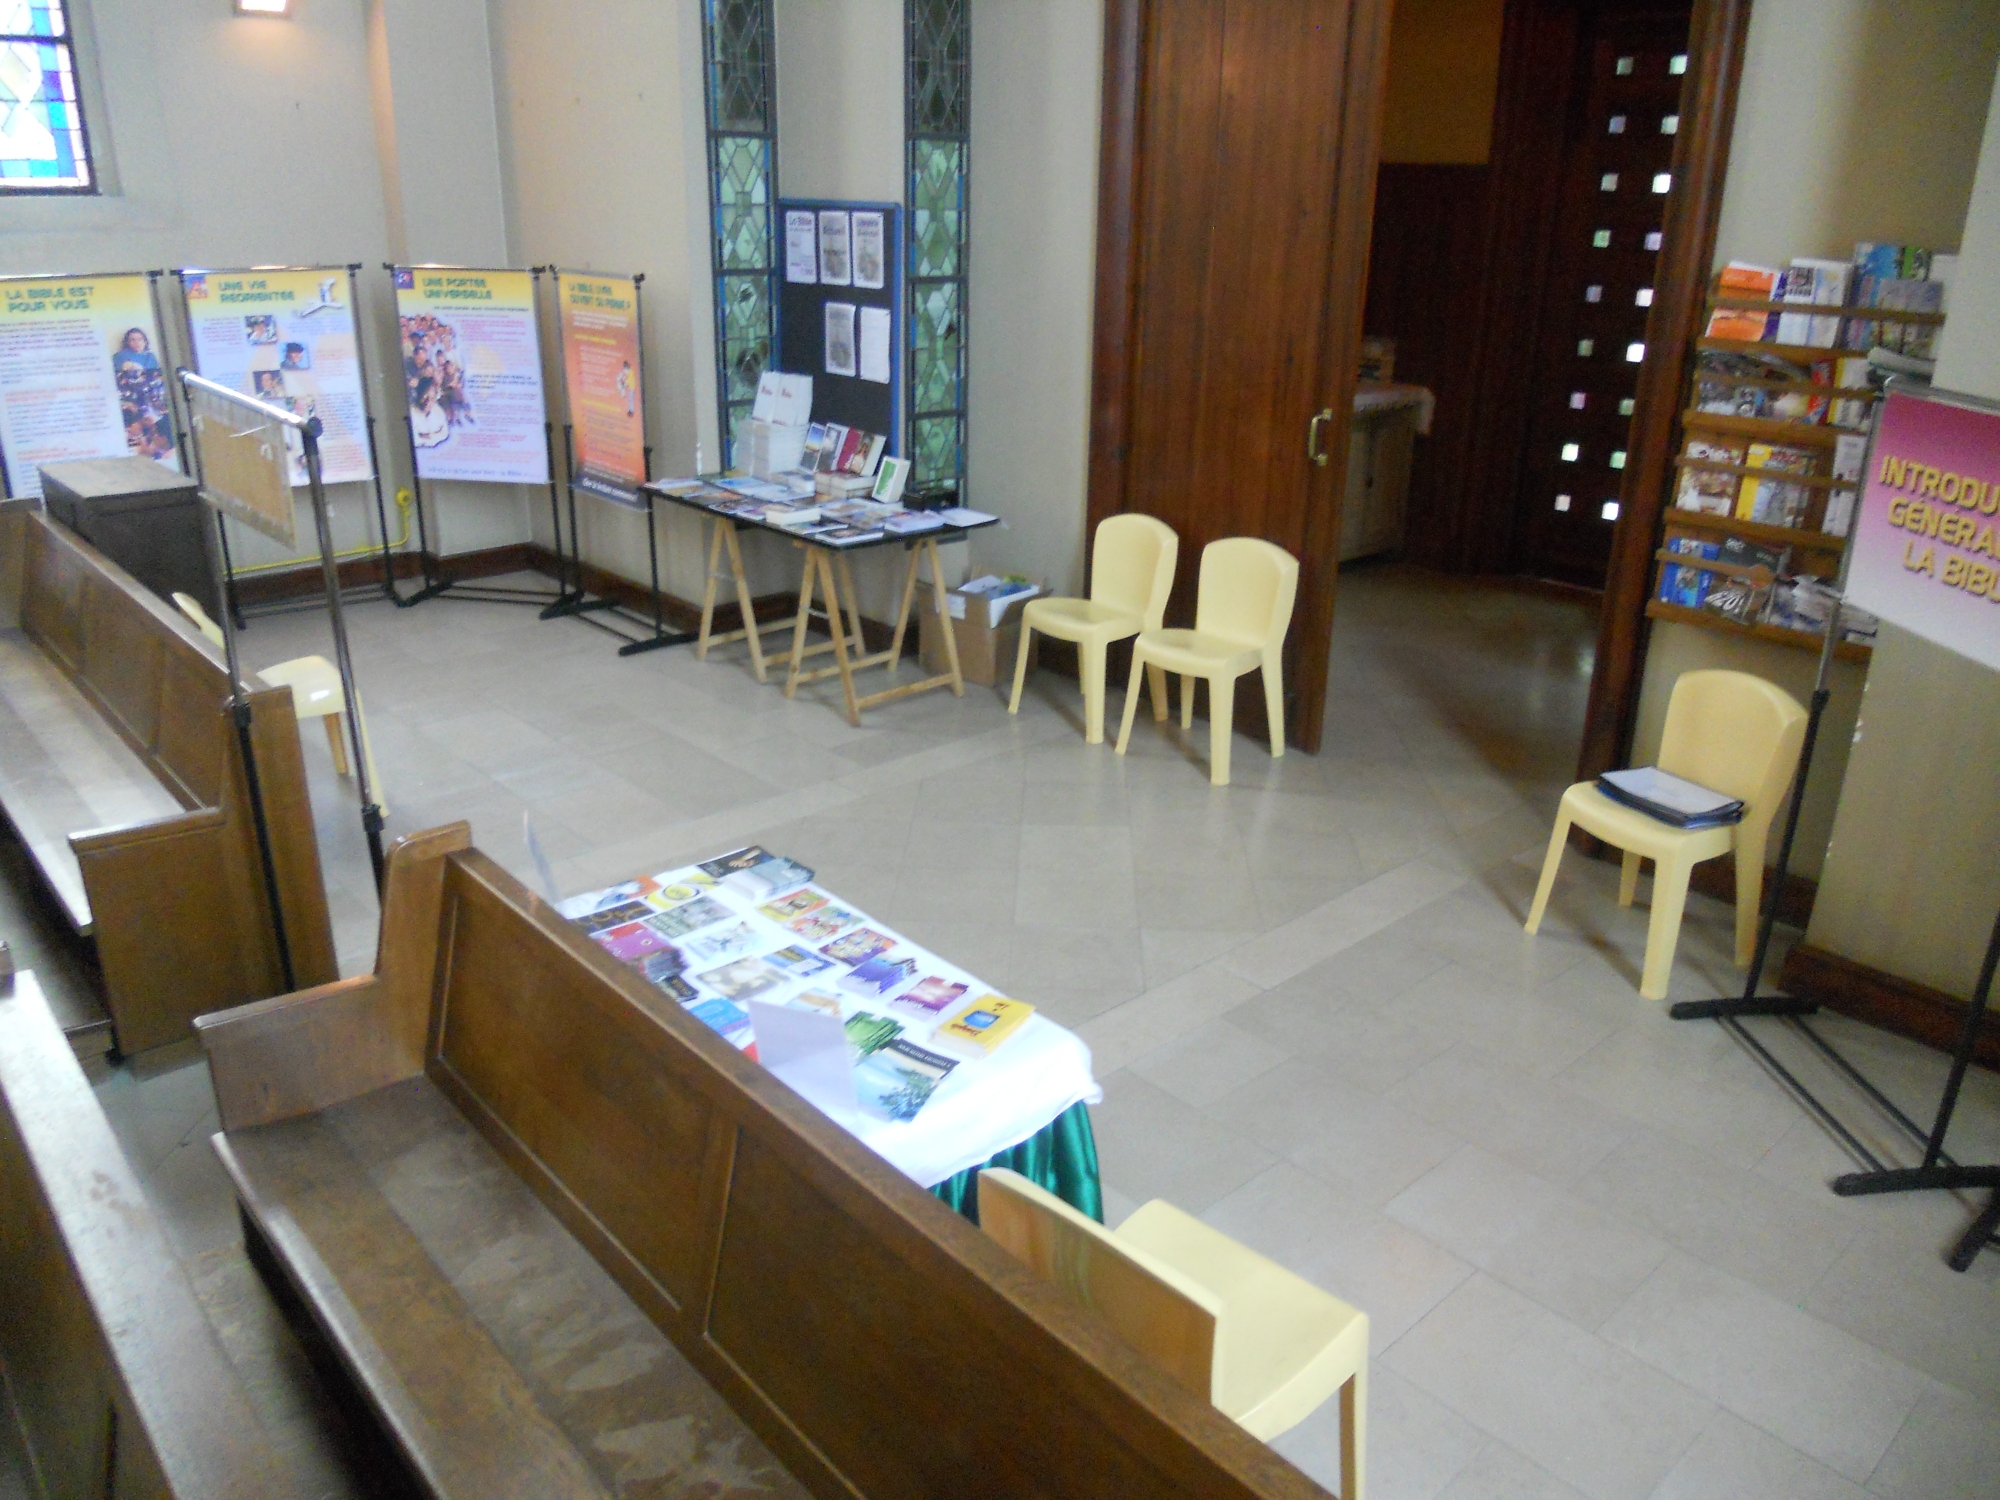 Books, Bibles and Christian literature available for visitors